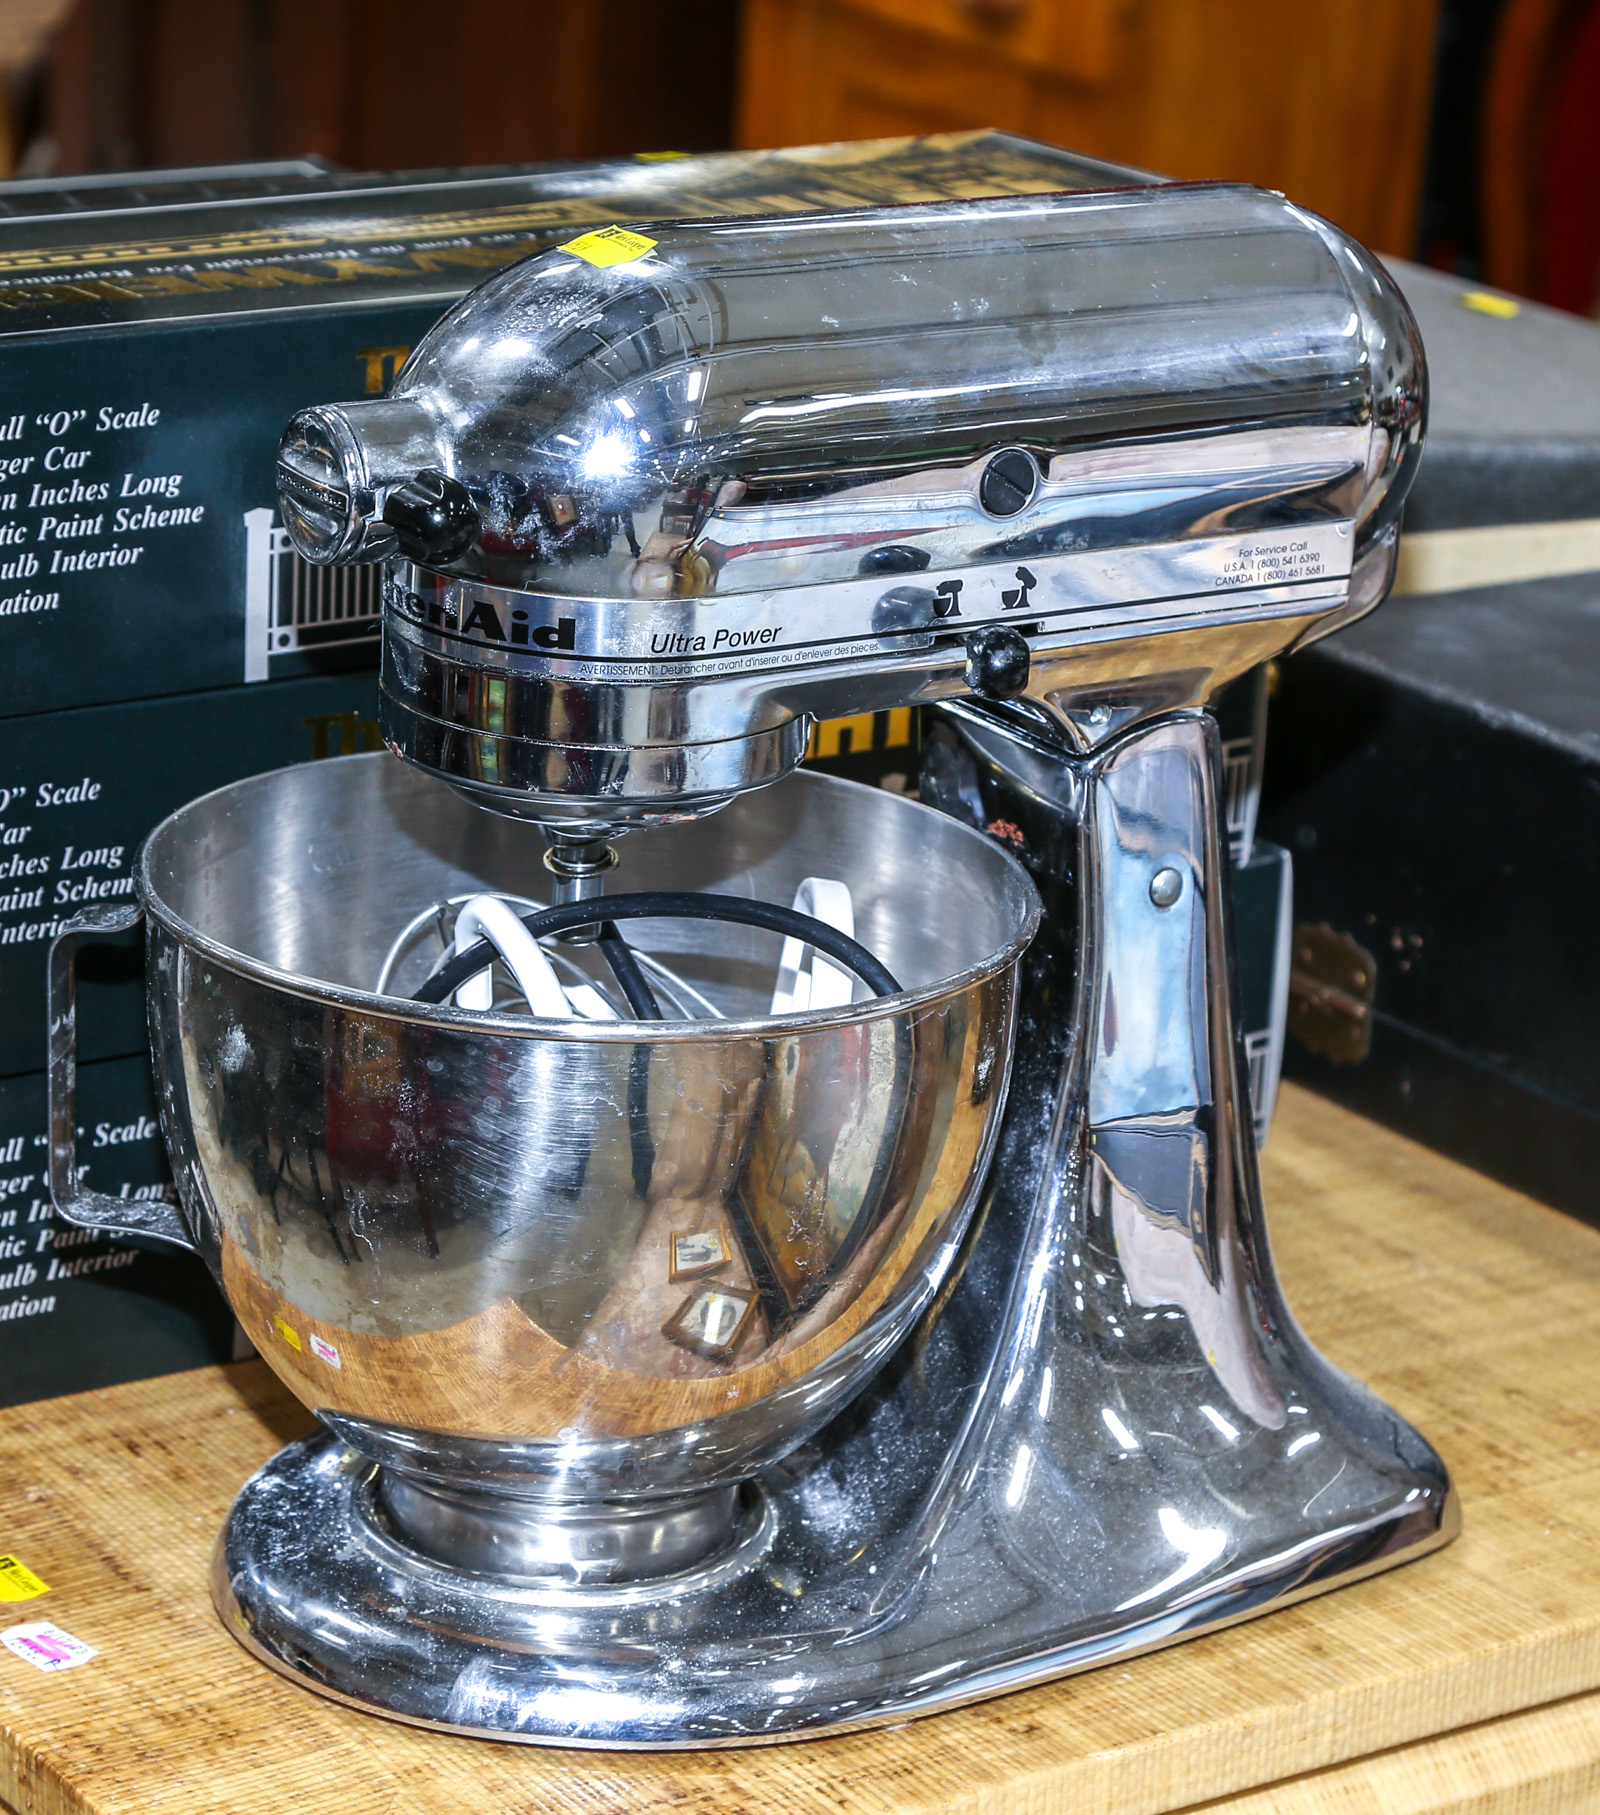 KITCHENAID STAND MIXER With three attachments